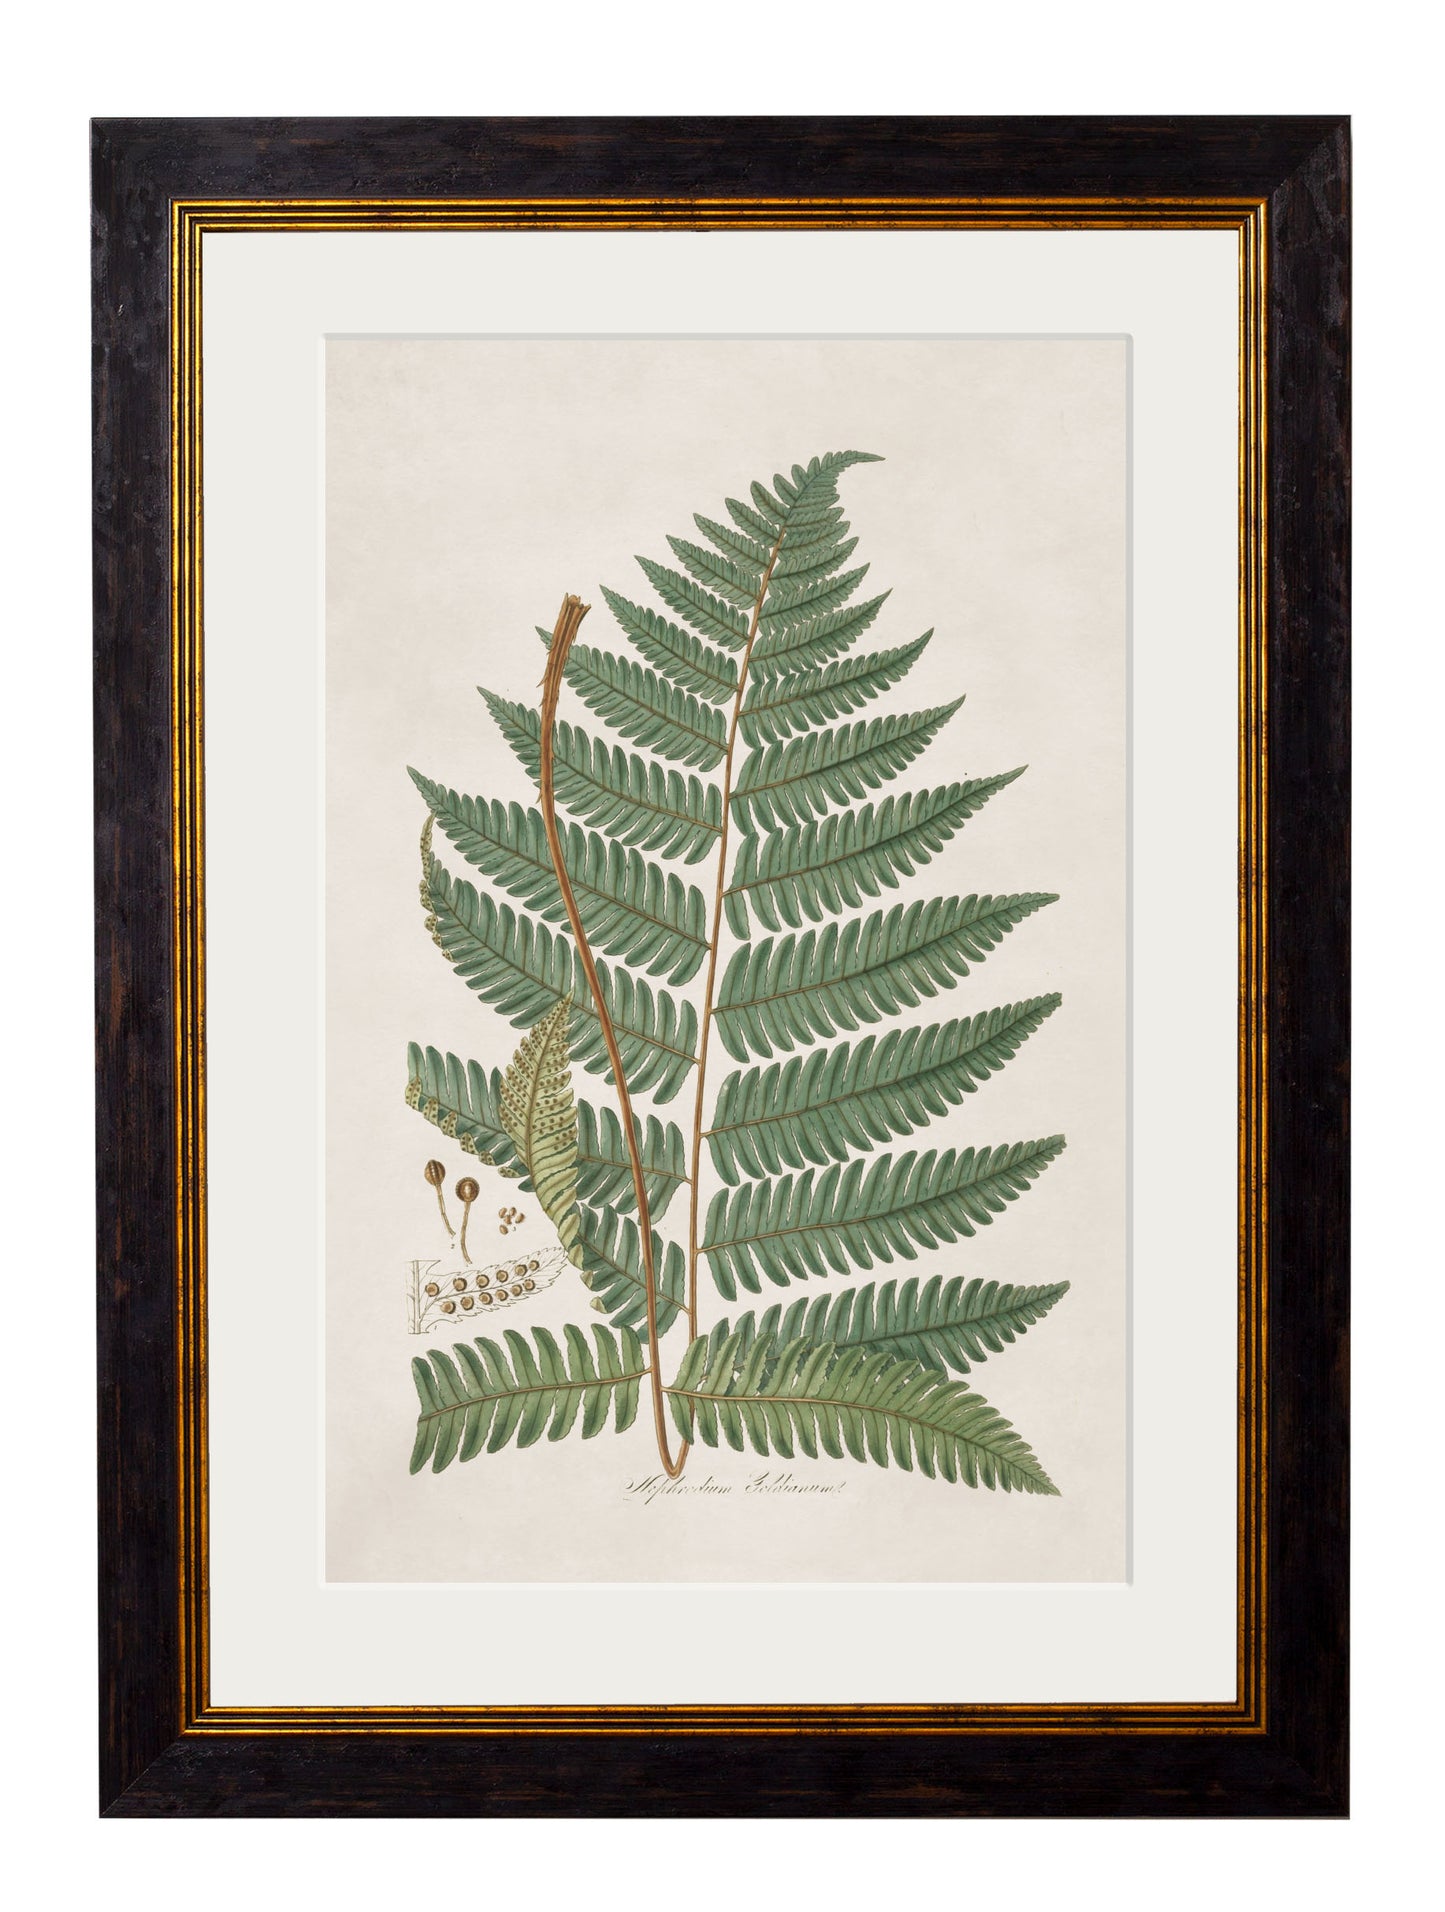 Framed Collection of Ferns (Set of Three)